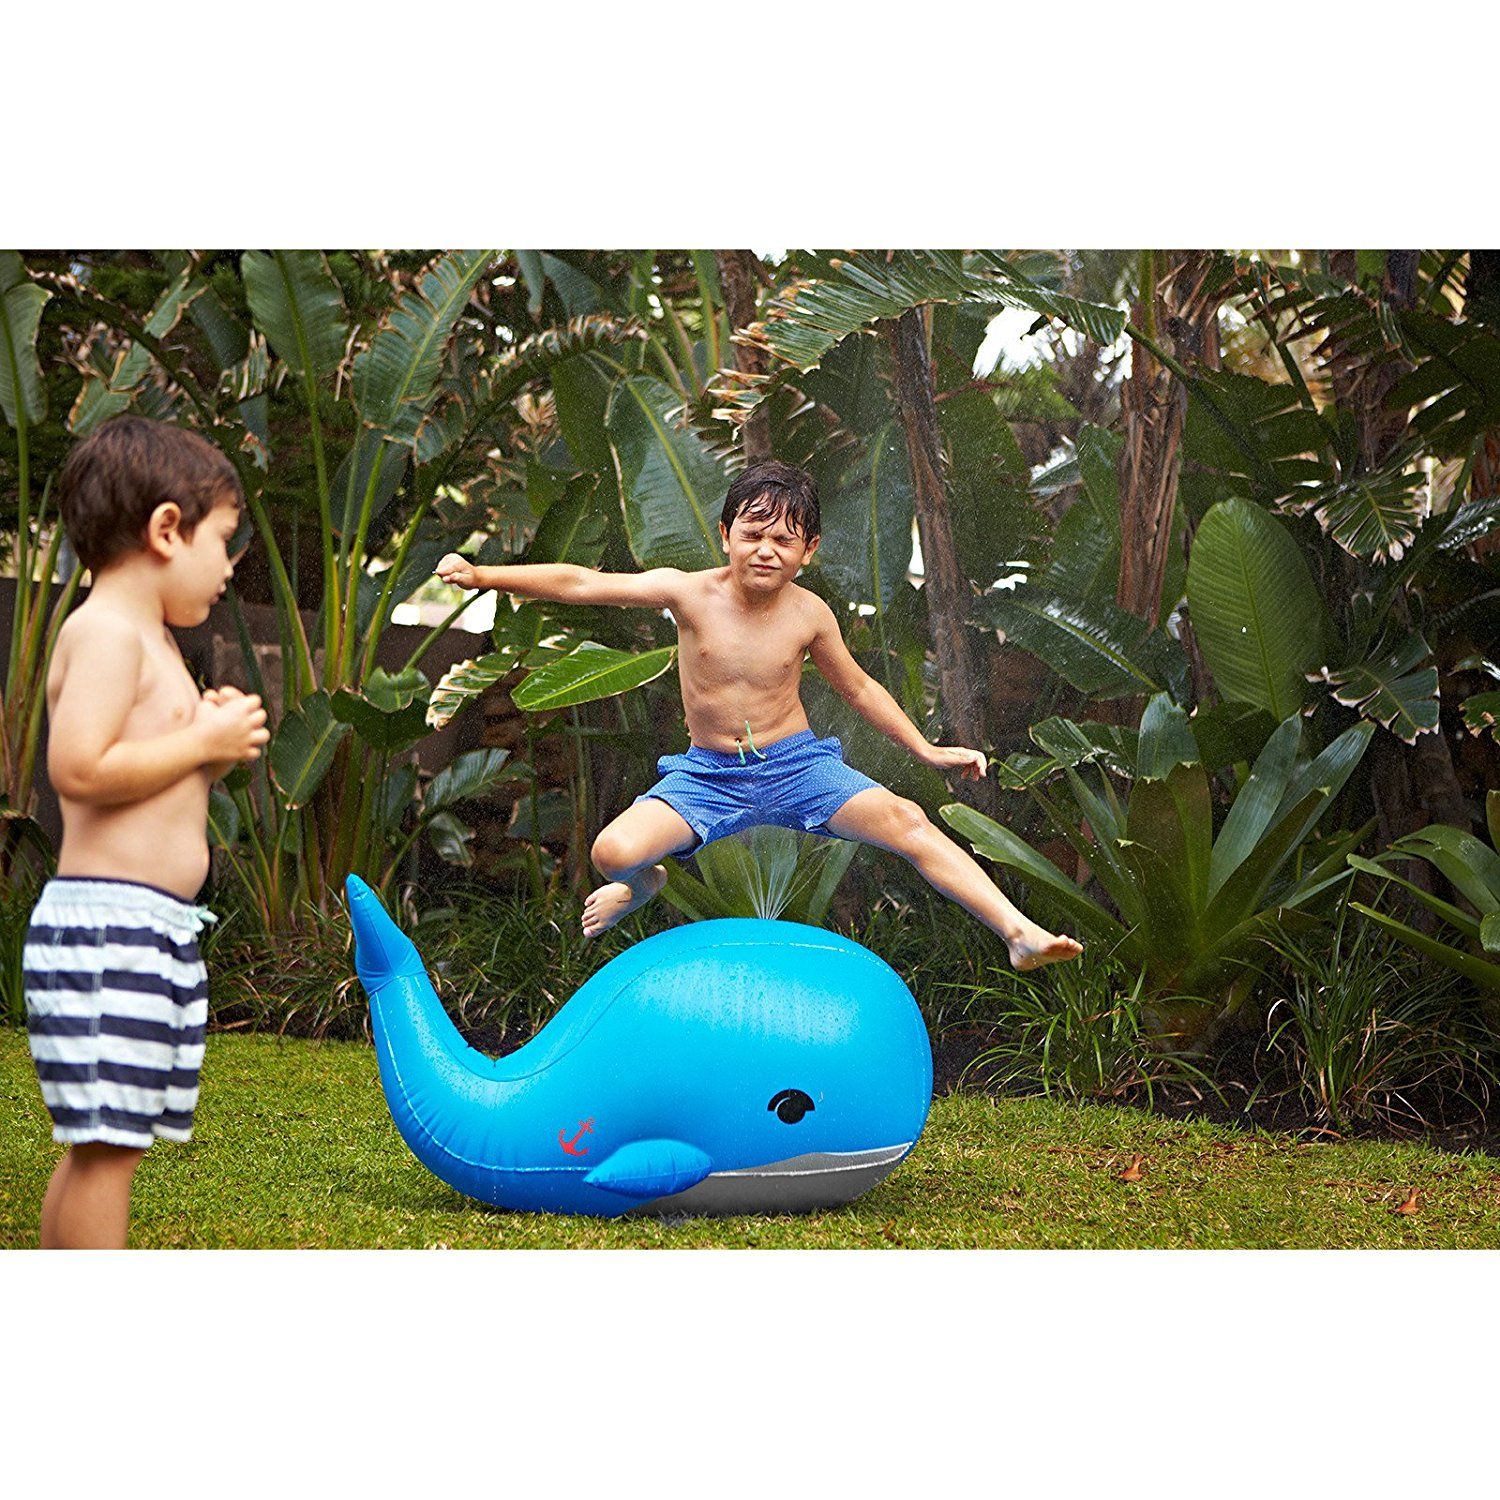 Moby dick inflatable sprinkler sunnylife